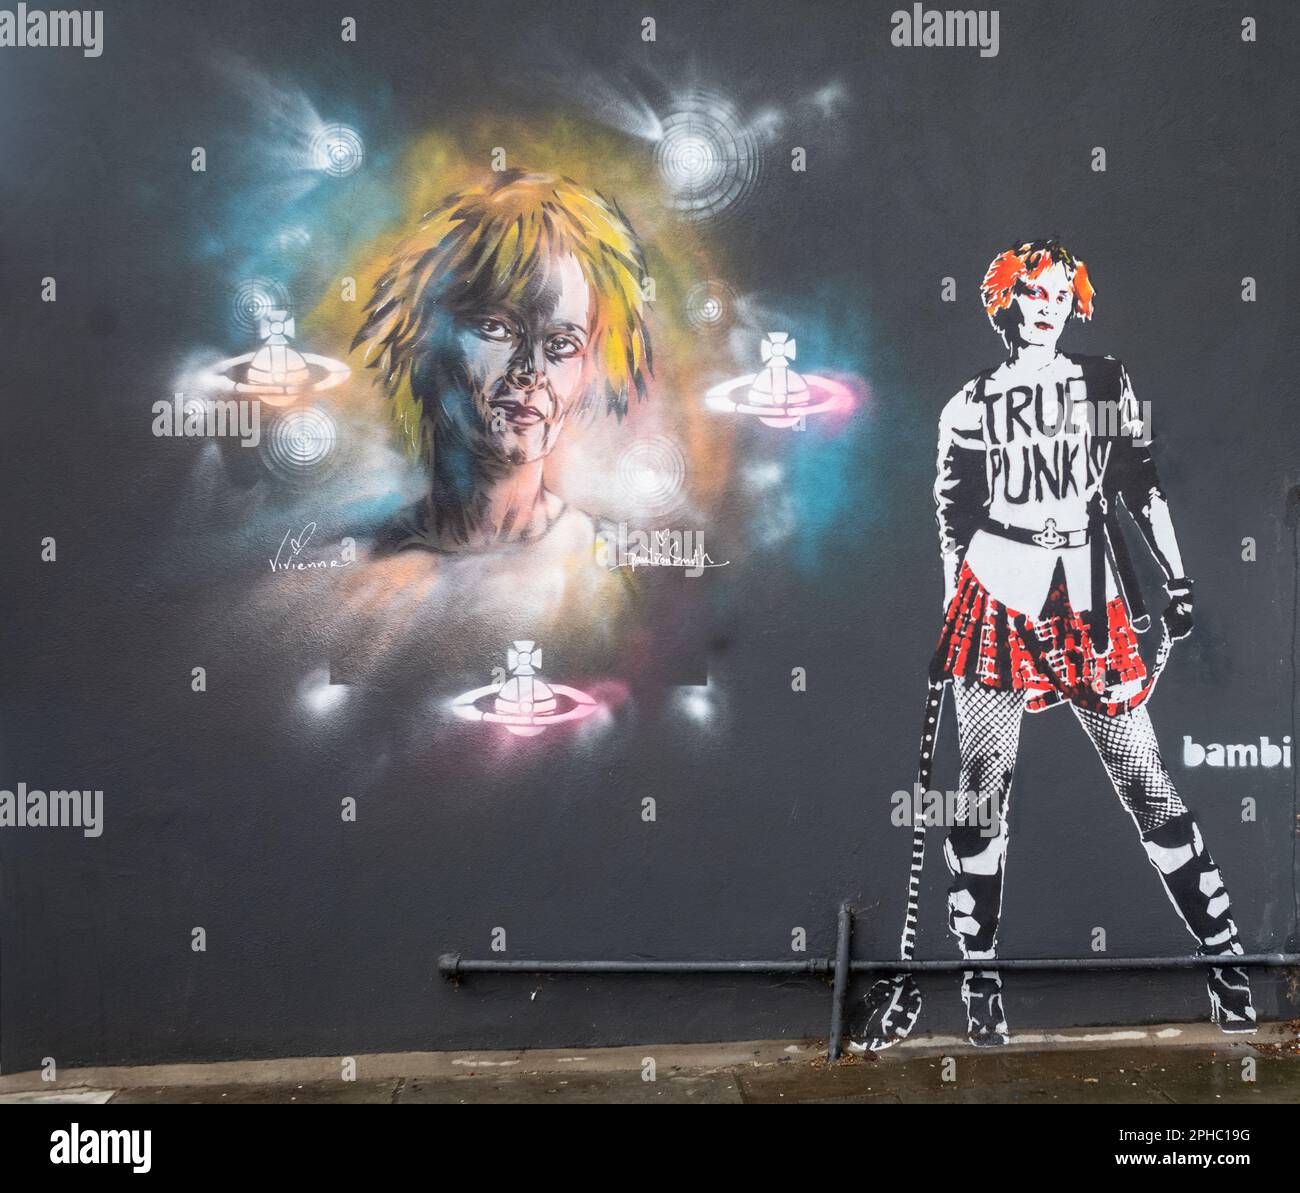 Street Art depicting punk icon Vivienne Westwood by Paul Don Smith, and a generic female punk by the anonymous artist known as Bambi on a wall in Worl Stock Photo